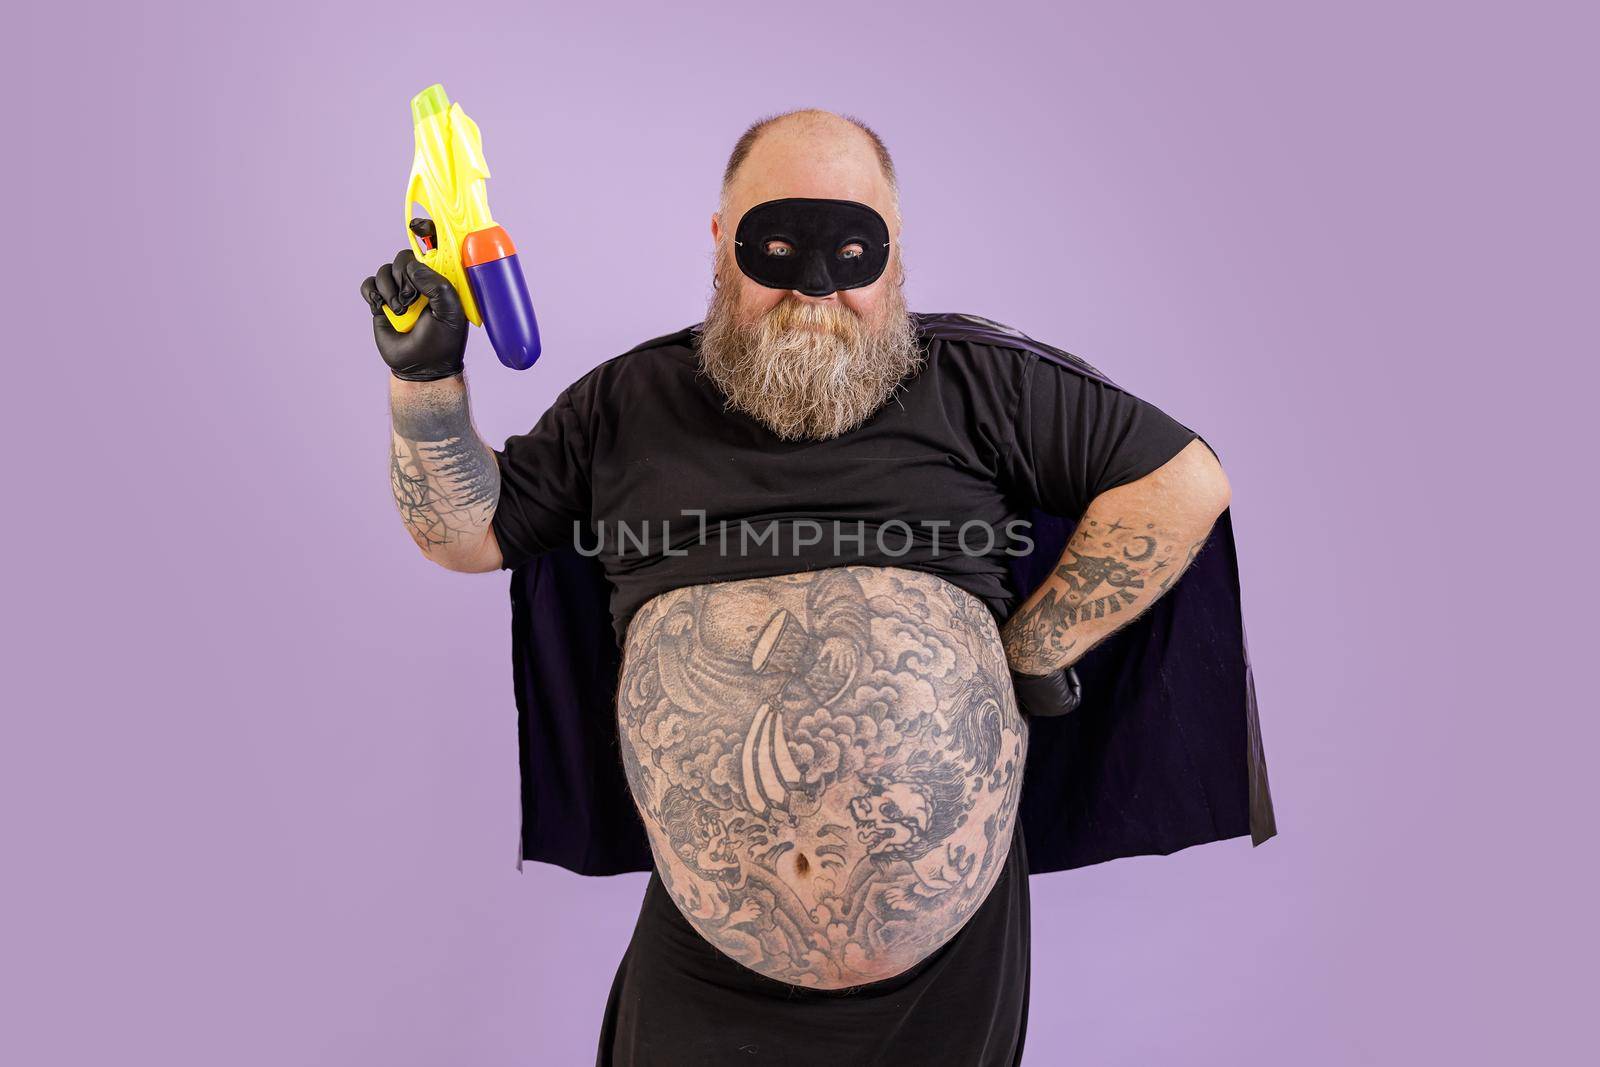 Bearded man with large tattooed abdomen in carnival costume holds toy blaster on purple background by Yaroslav_astakhov